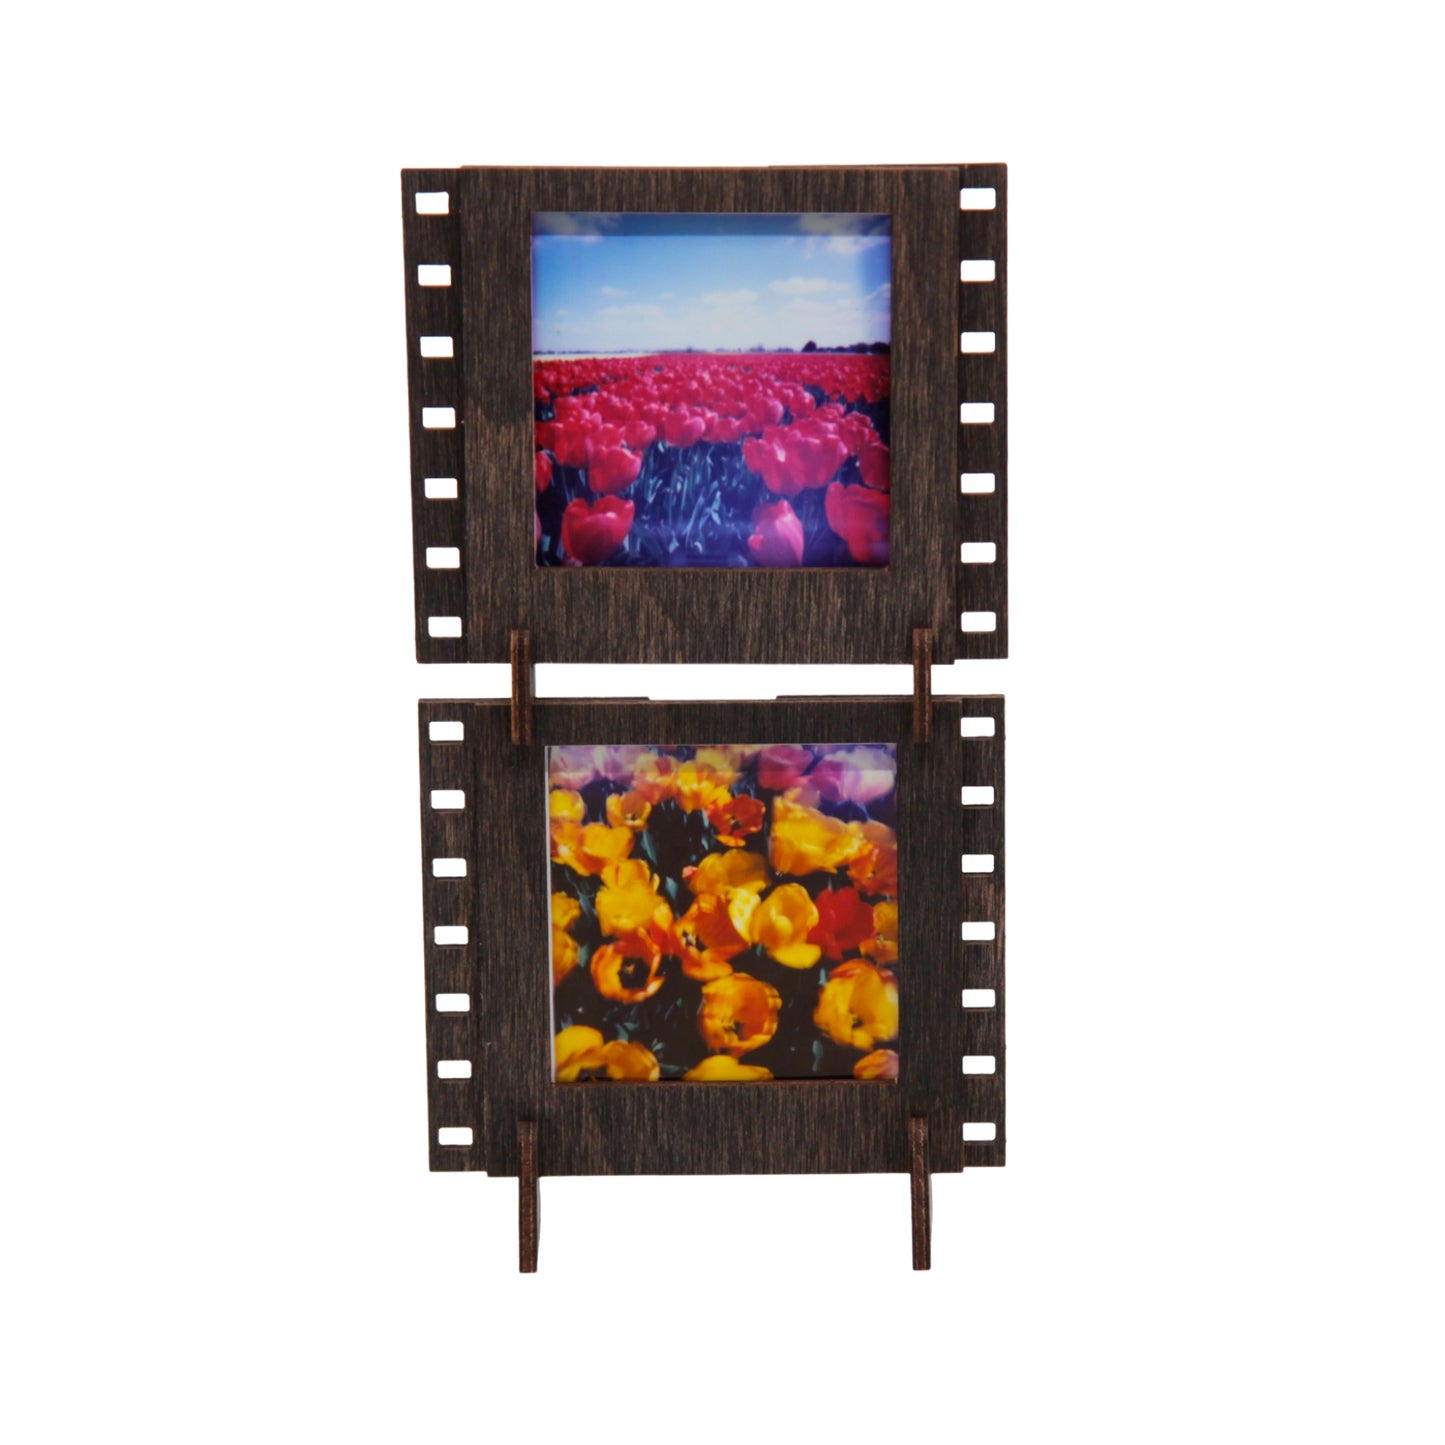 A set of two stained brown plywood interconnectable Instax SQUARE film photo frames for instant SQUARE photos.